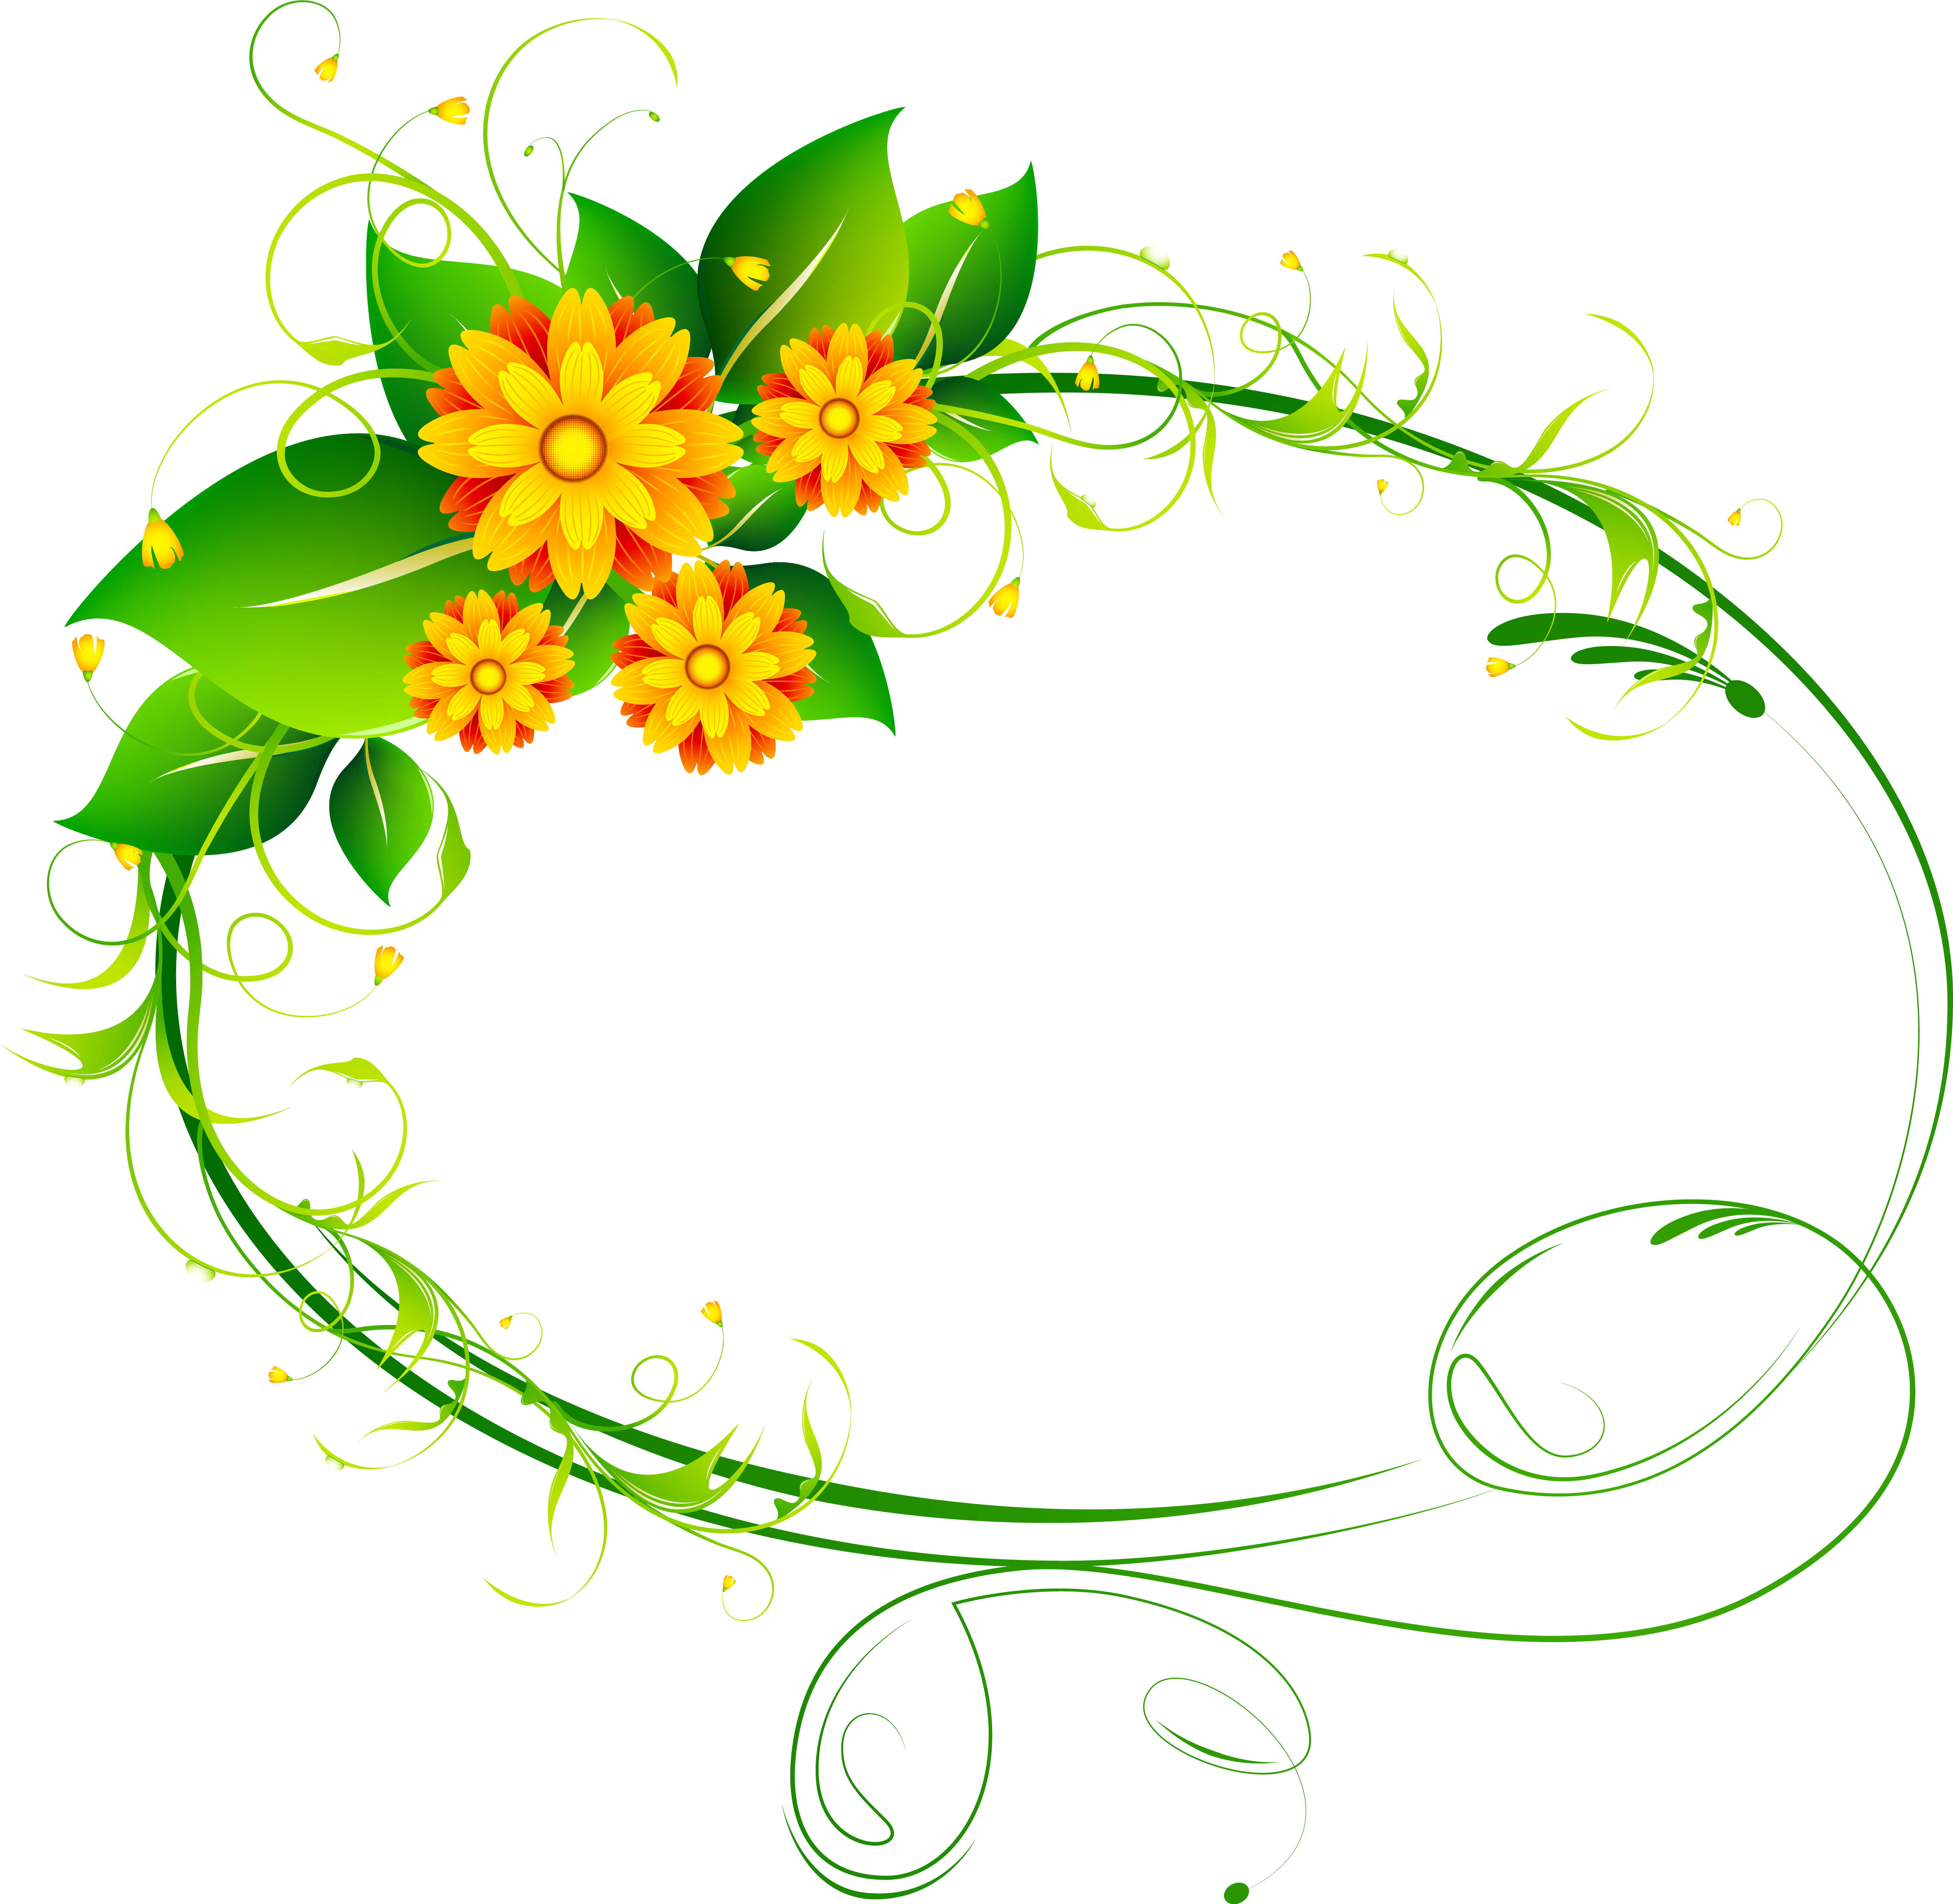 A Green And Yellow Flower Design